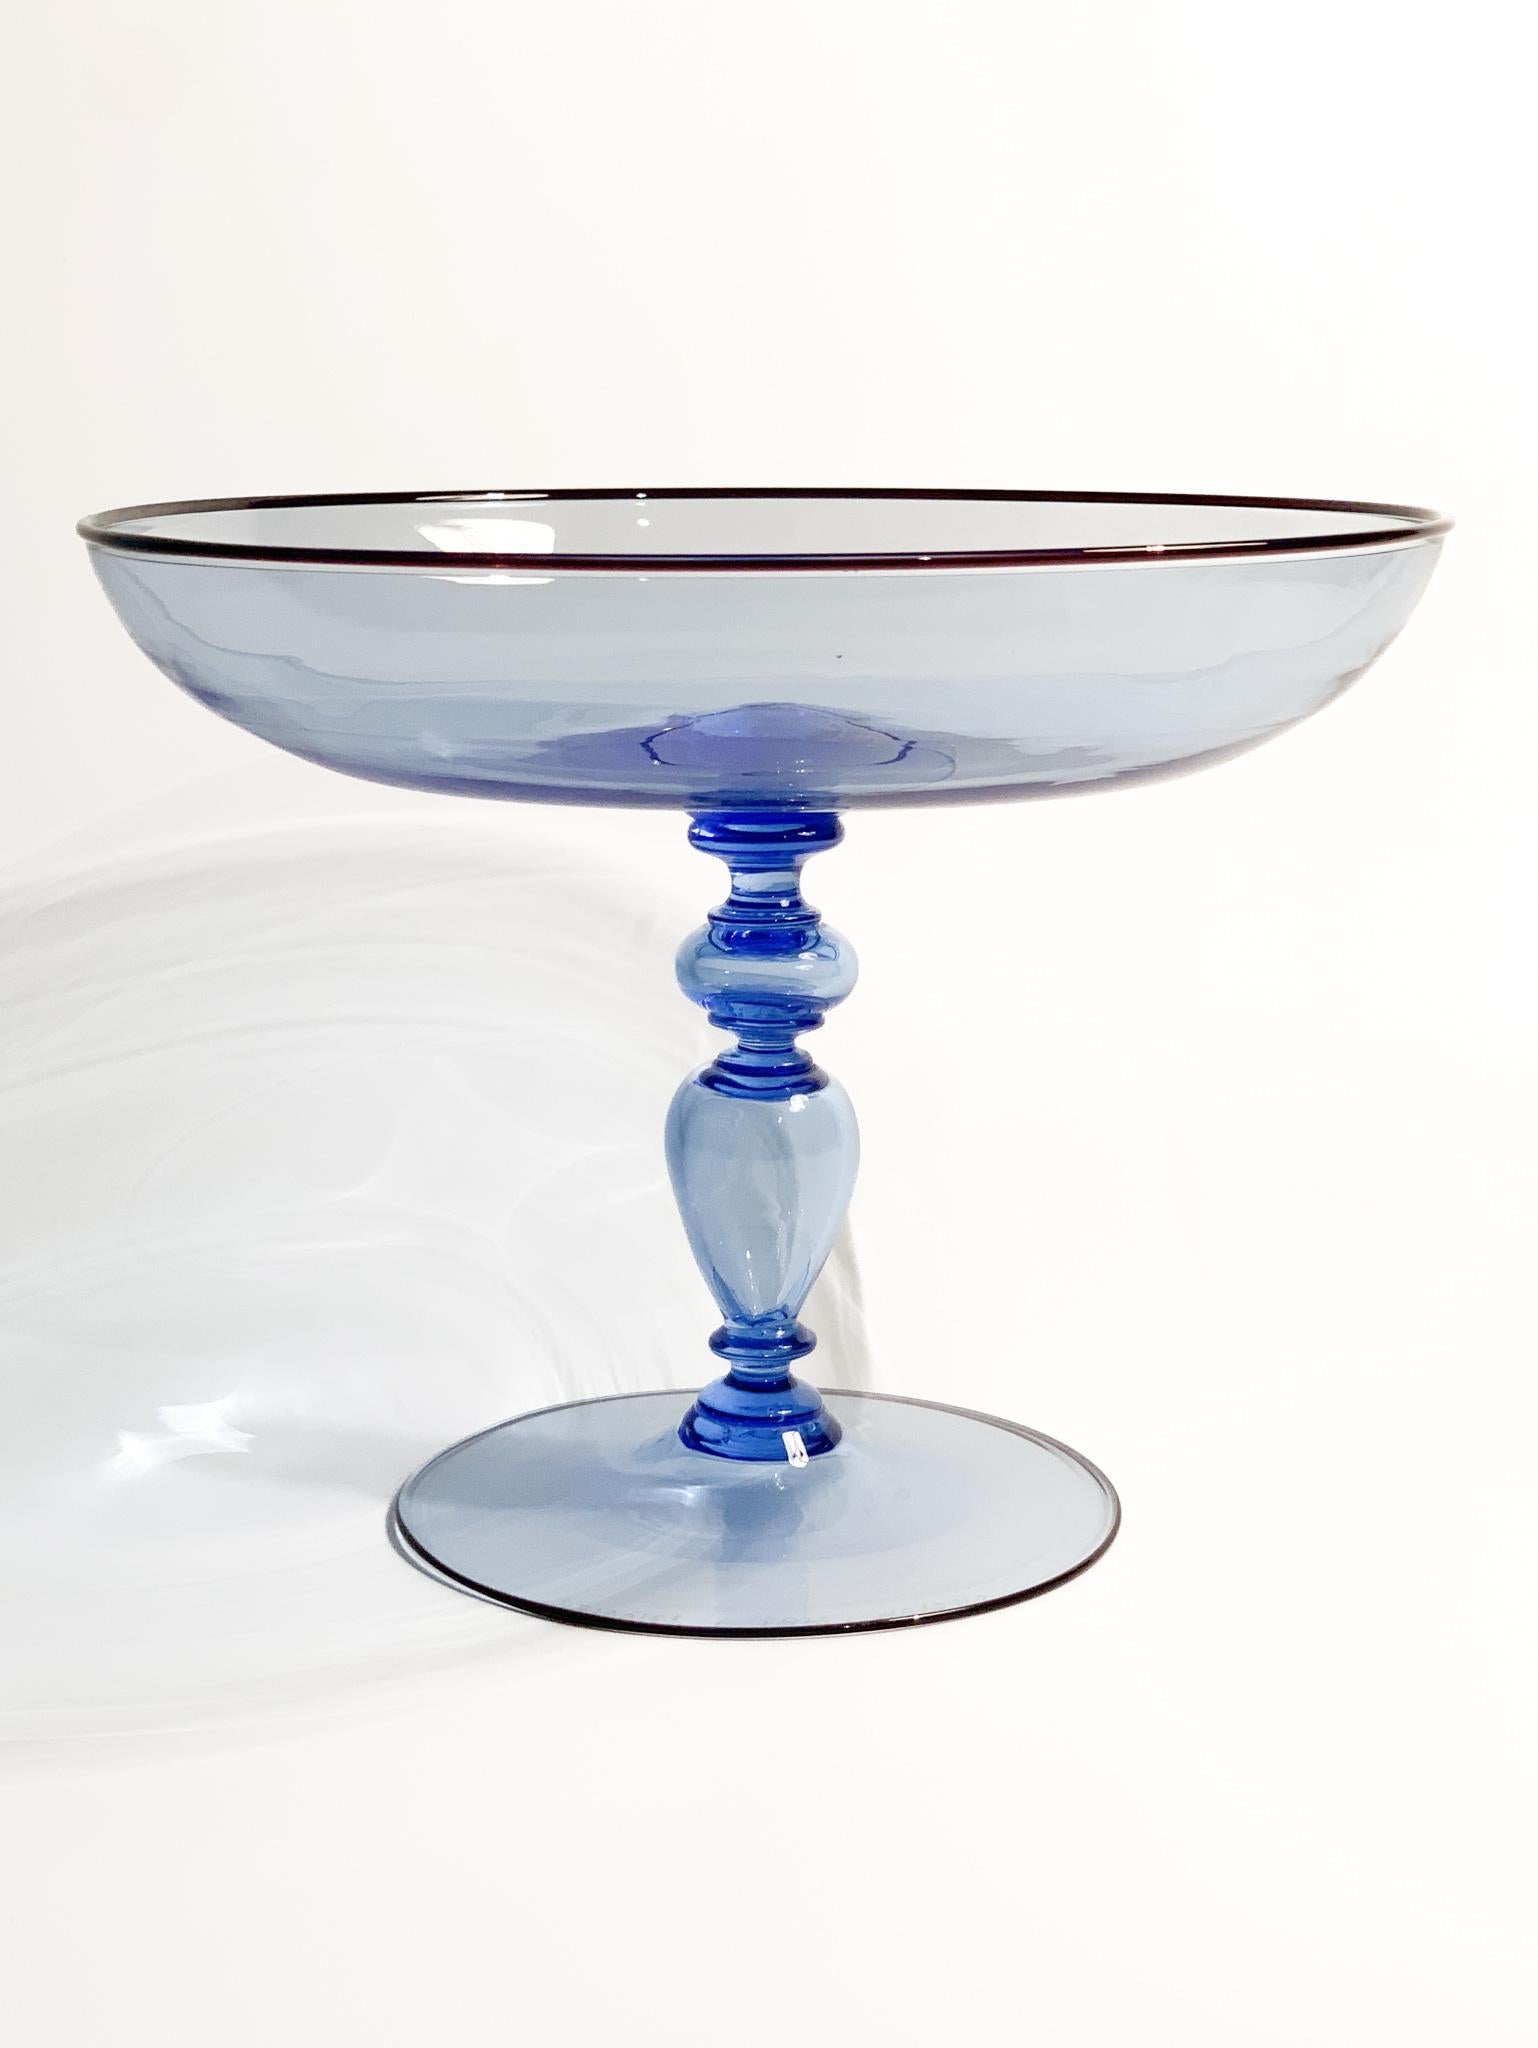 Caravaggio Cup Murano Glass Centerpiece by Barovier & Toso from the 1980s For Sale 5